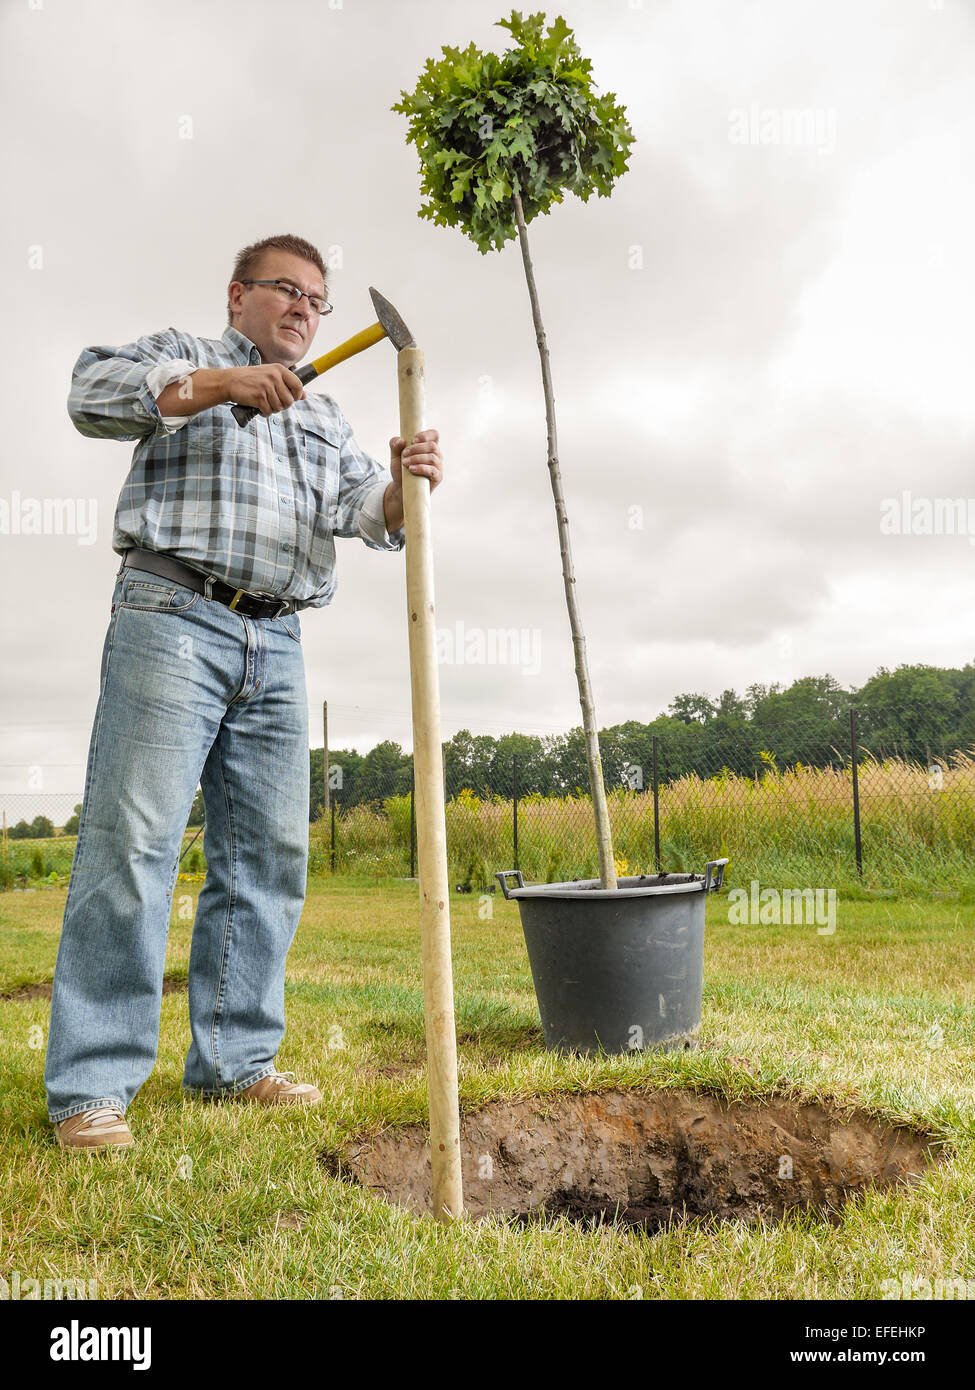 Young man hammering wooden per for supporting oak tree planted in the ground Stock Photo